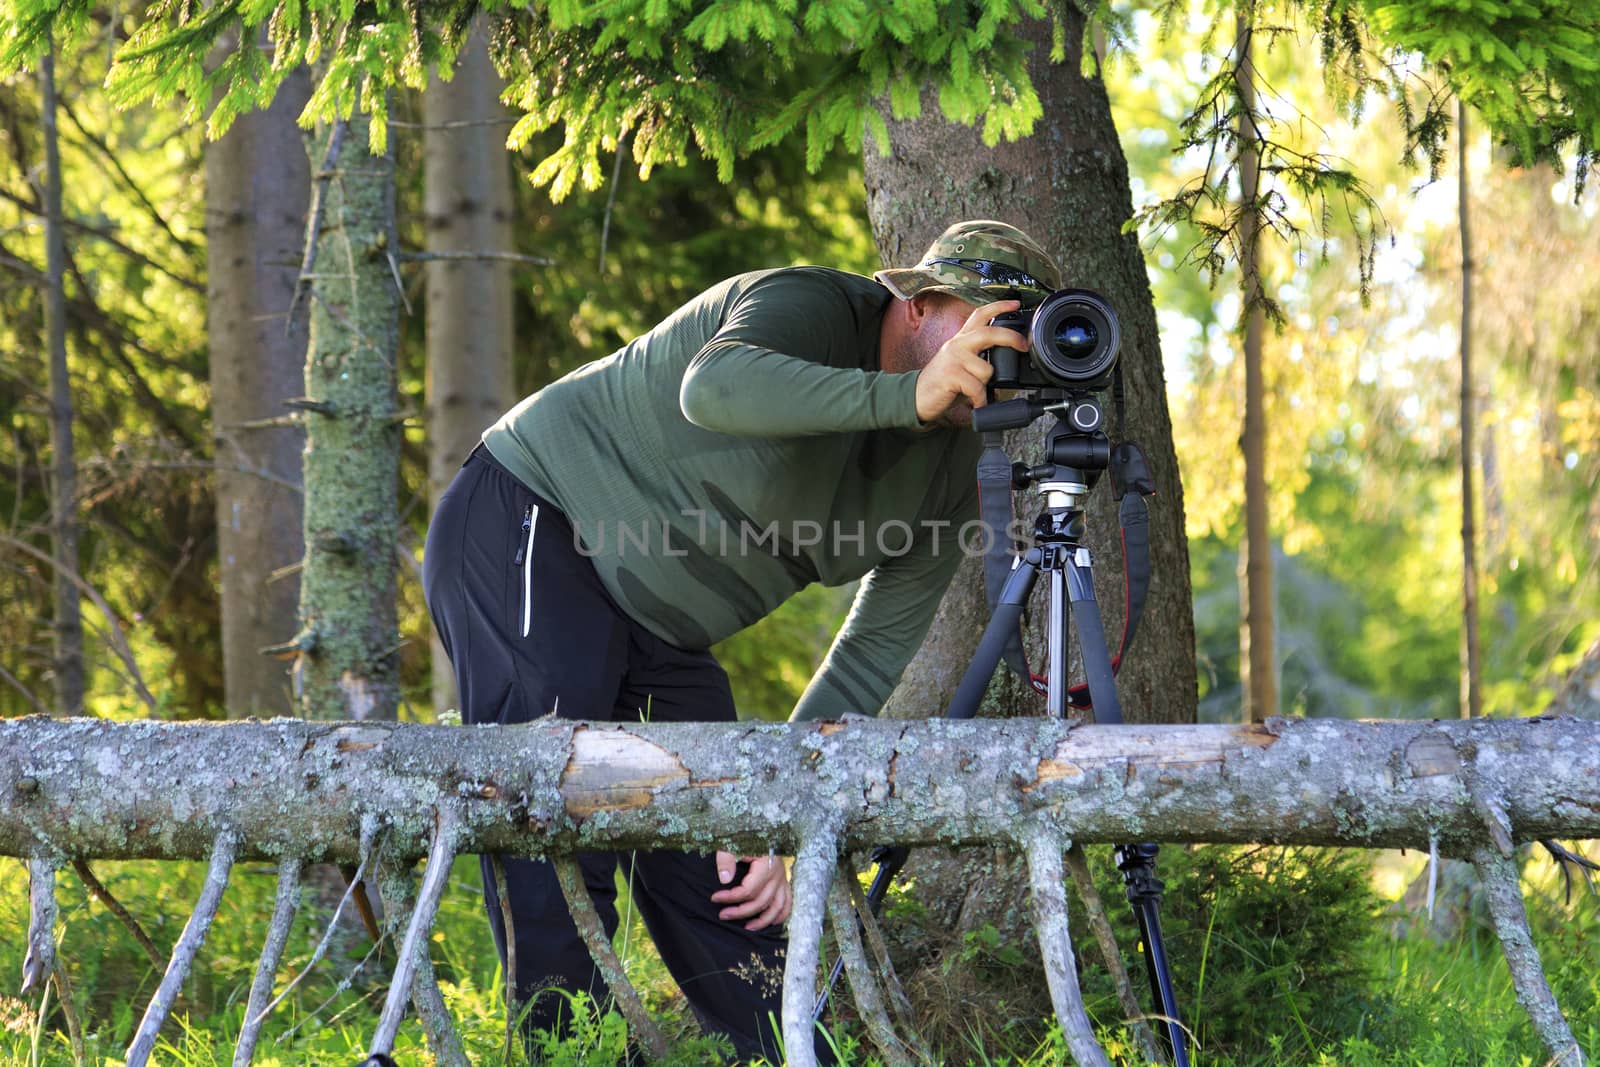 The photographer sets up the camera and hides behind the fir branches at the edge of the forest. by Sergii